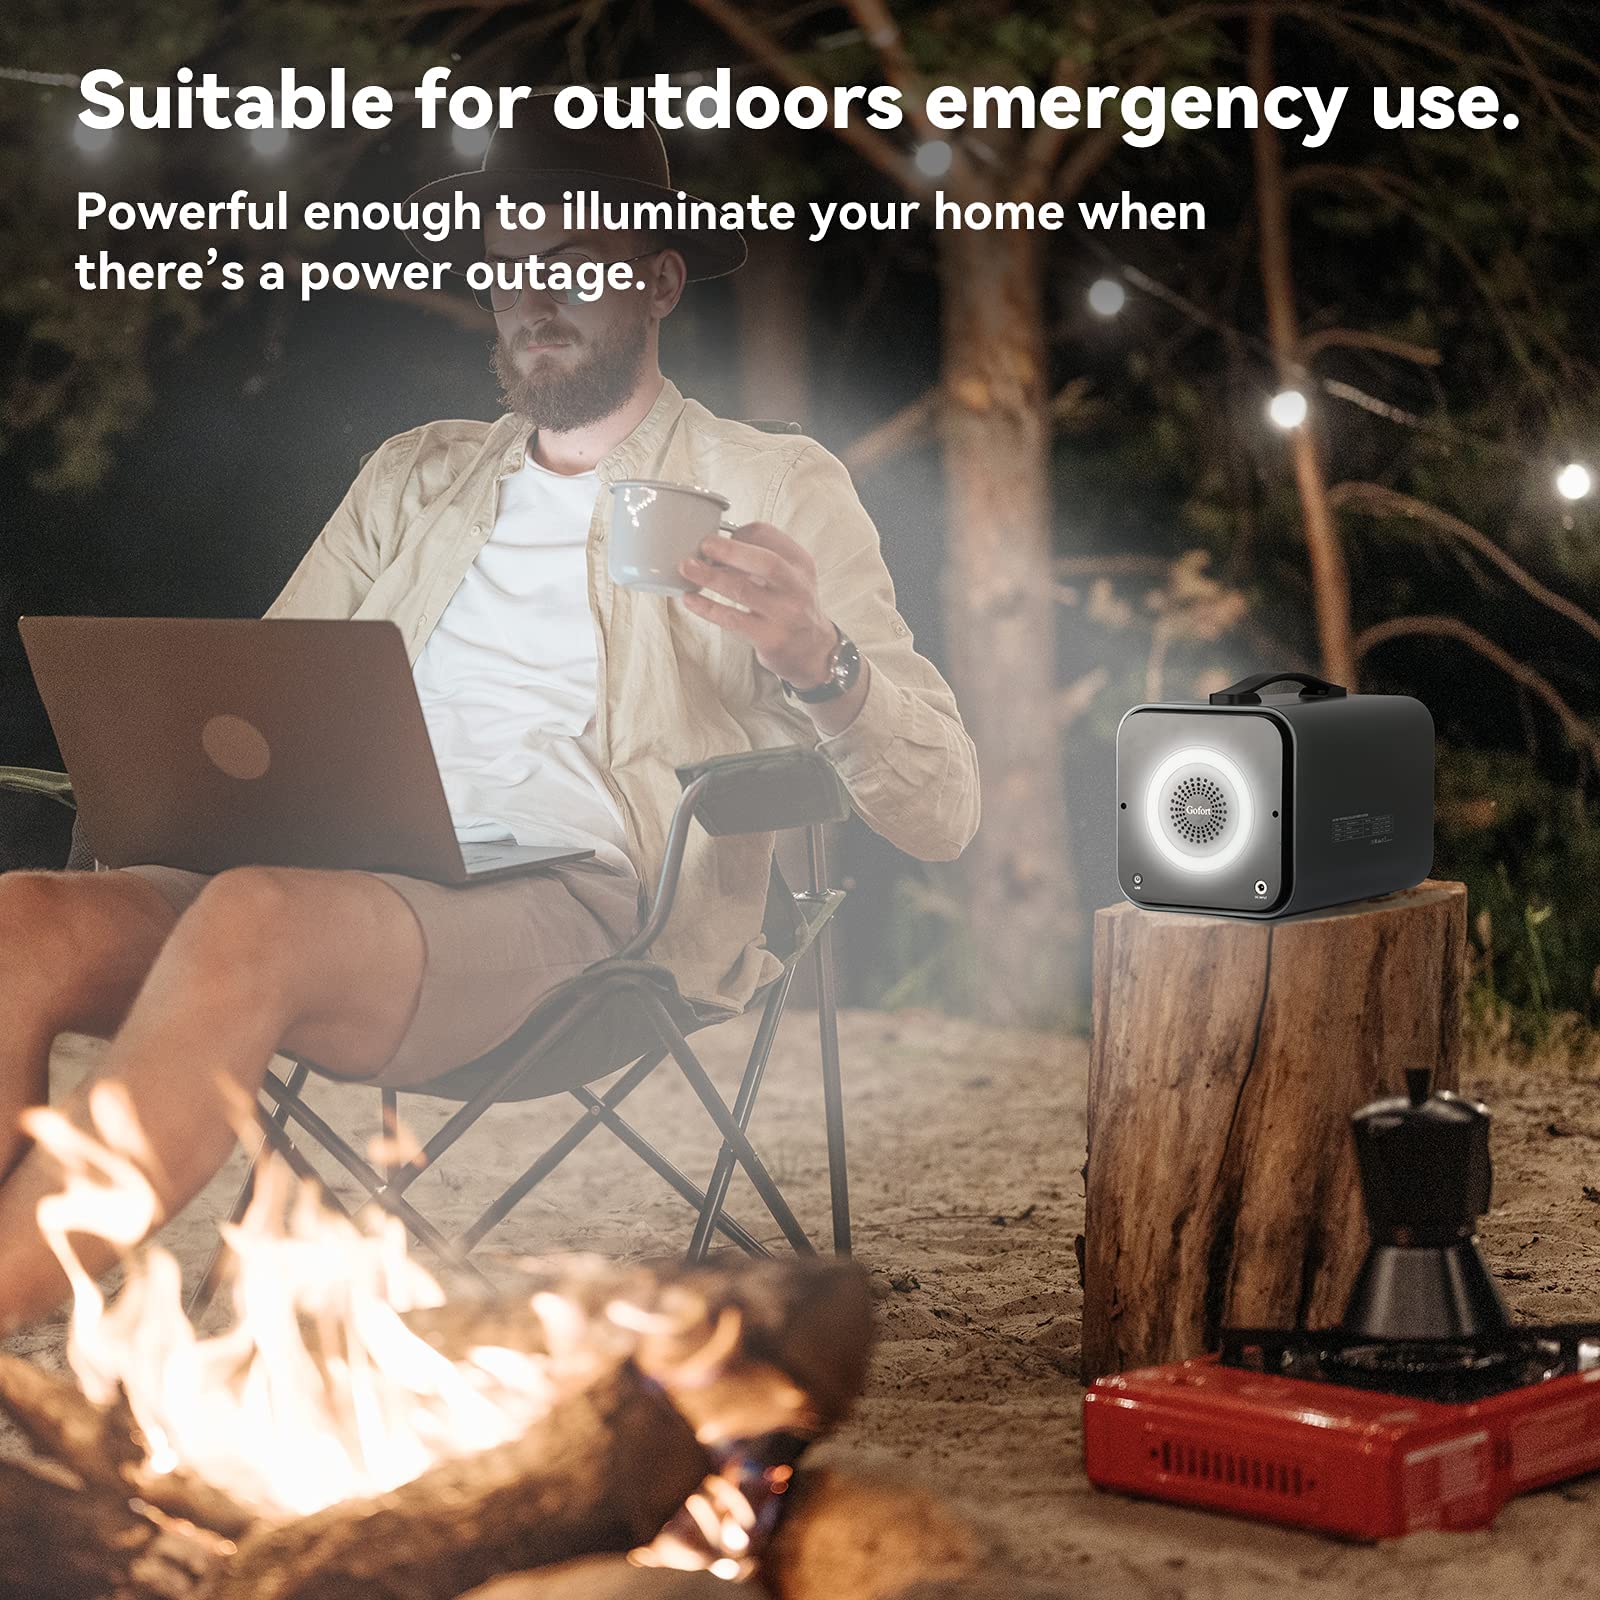 GOFORT 1200W Portable Power Station